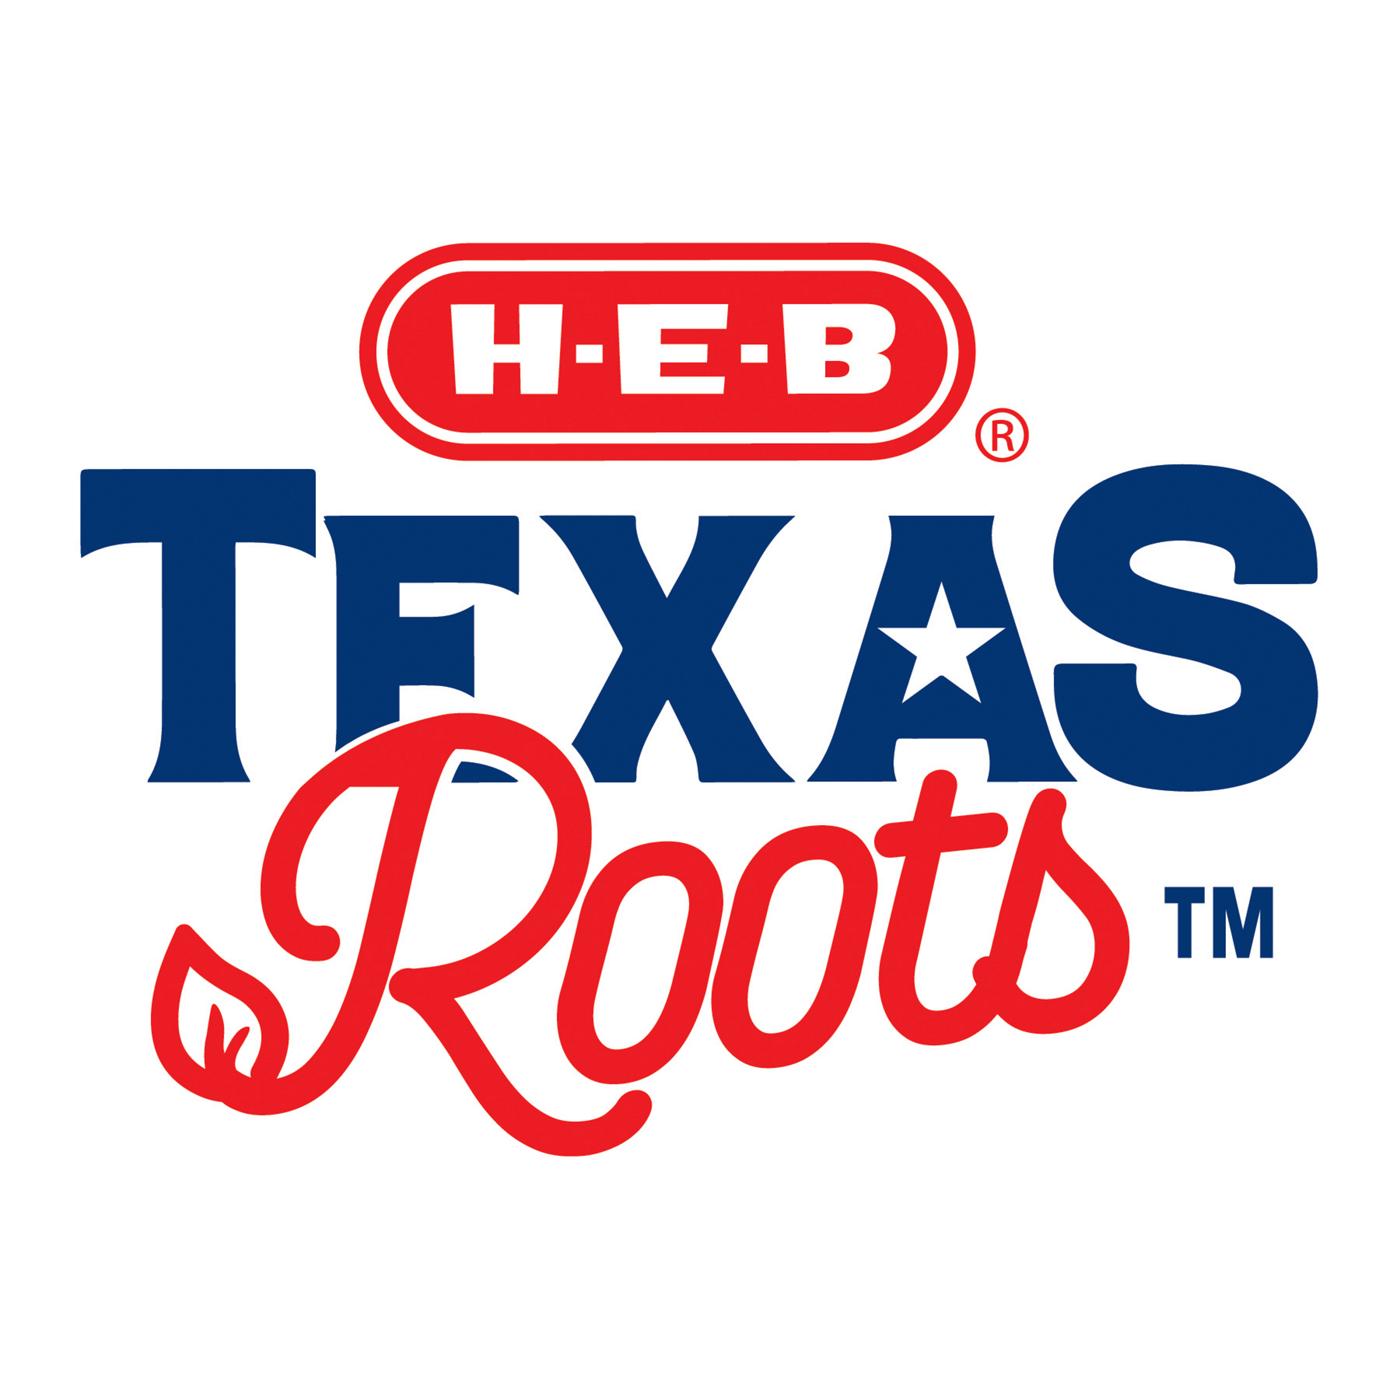 H-E-B Texas Roots Sweet 100 Tomato; image 2 of 2